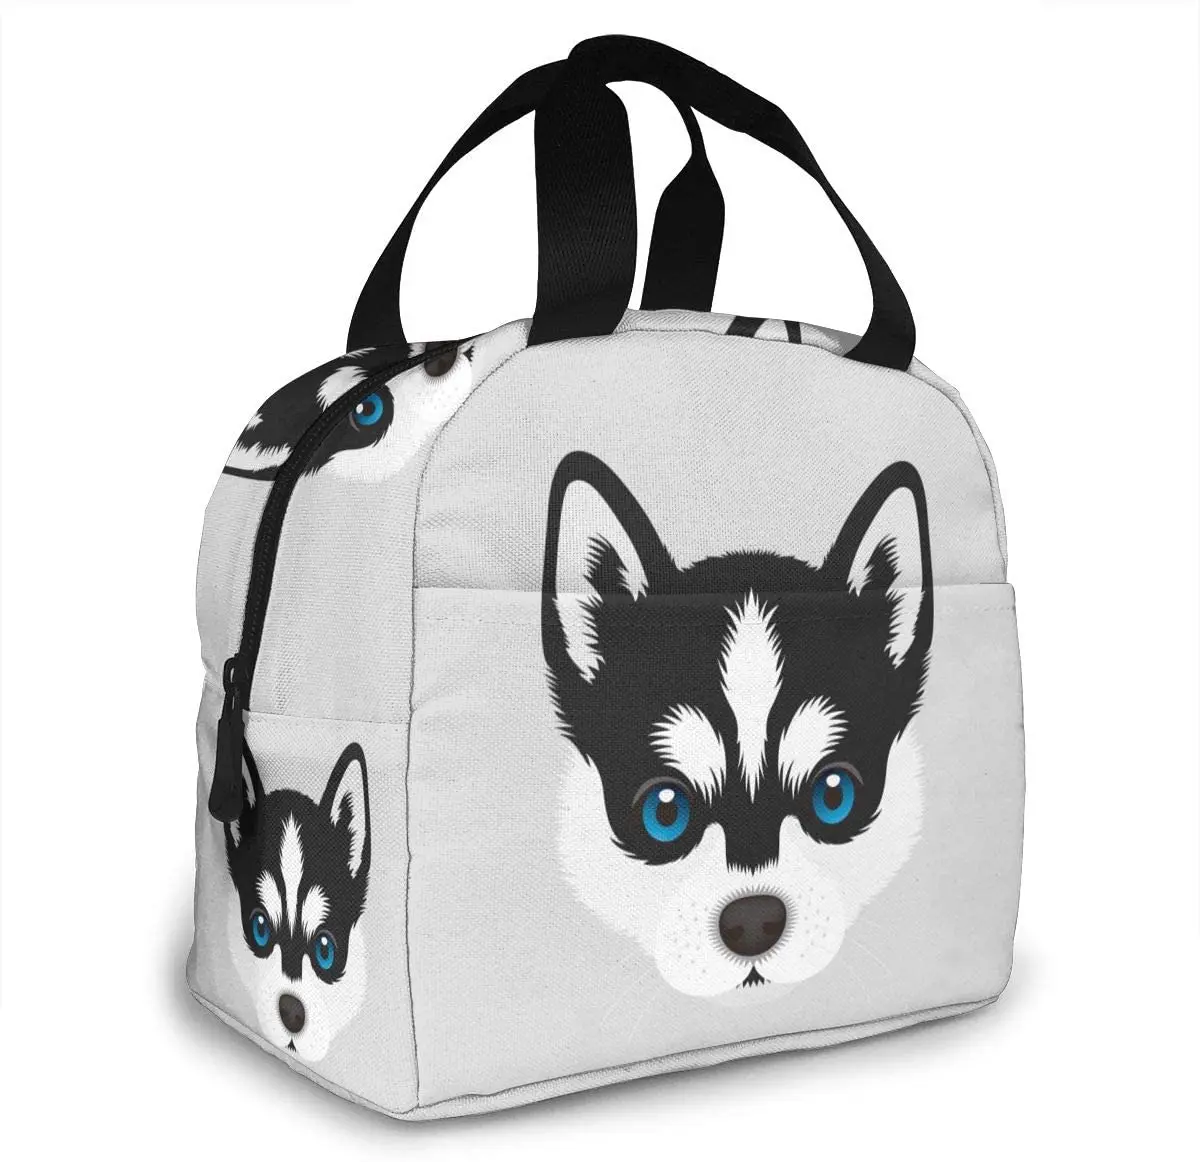 Funny Dog Puppy Siberian Husky Insulated Lunch Box Reusable Cooler Tote Bag Waterproof Lunch Holder Gift for Women Work Picnic lunch bag for women men mushroom art reusable insulated cooler lunch tote box cute funny container lunch holder portable bag